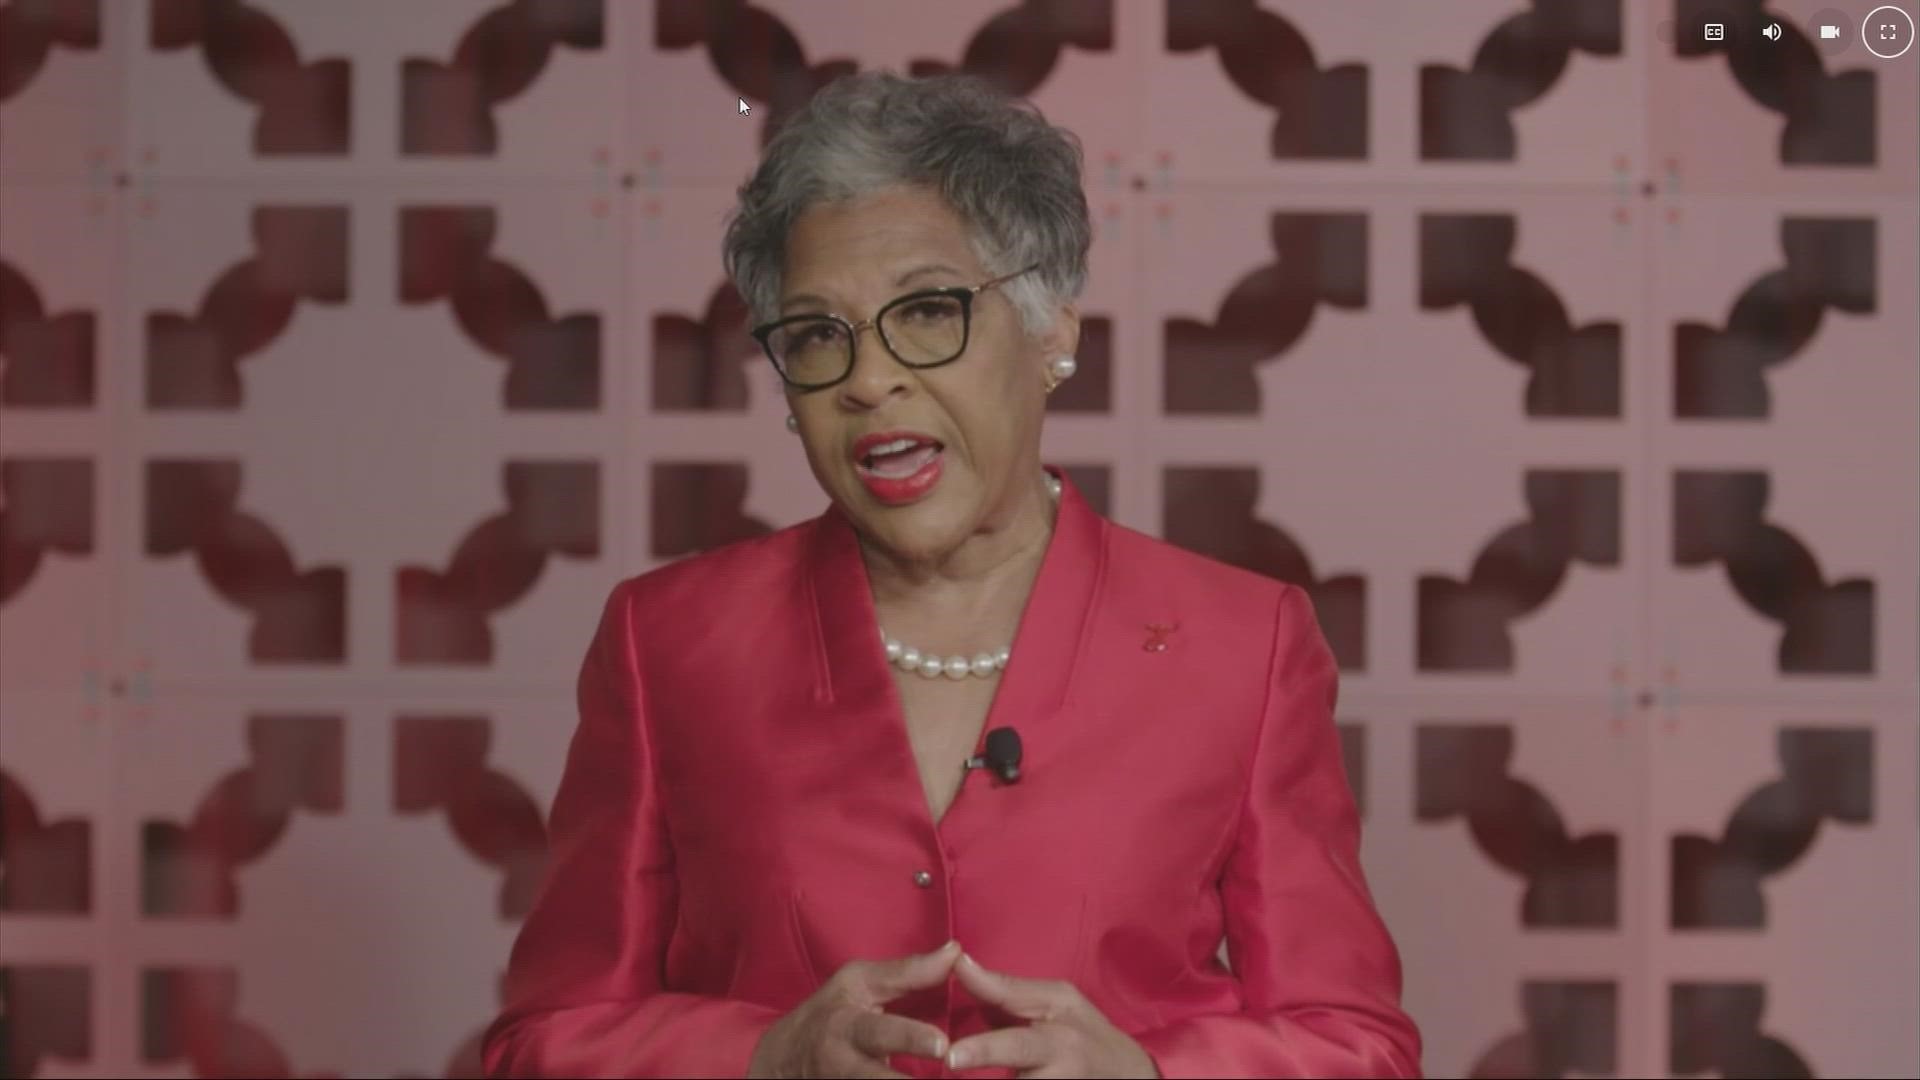 Congresswoman Joyce Beatty and other women advocated for heart health during the campaign Thursday.